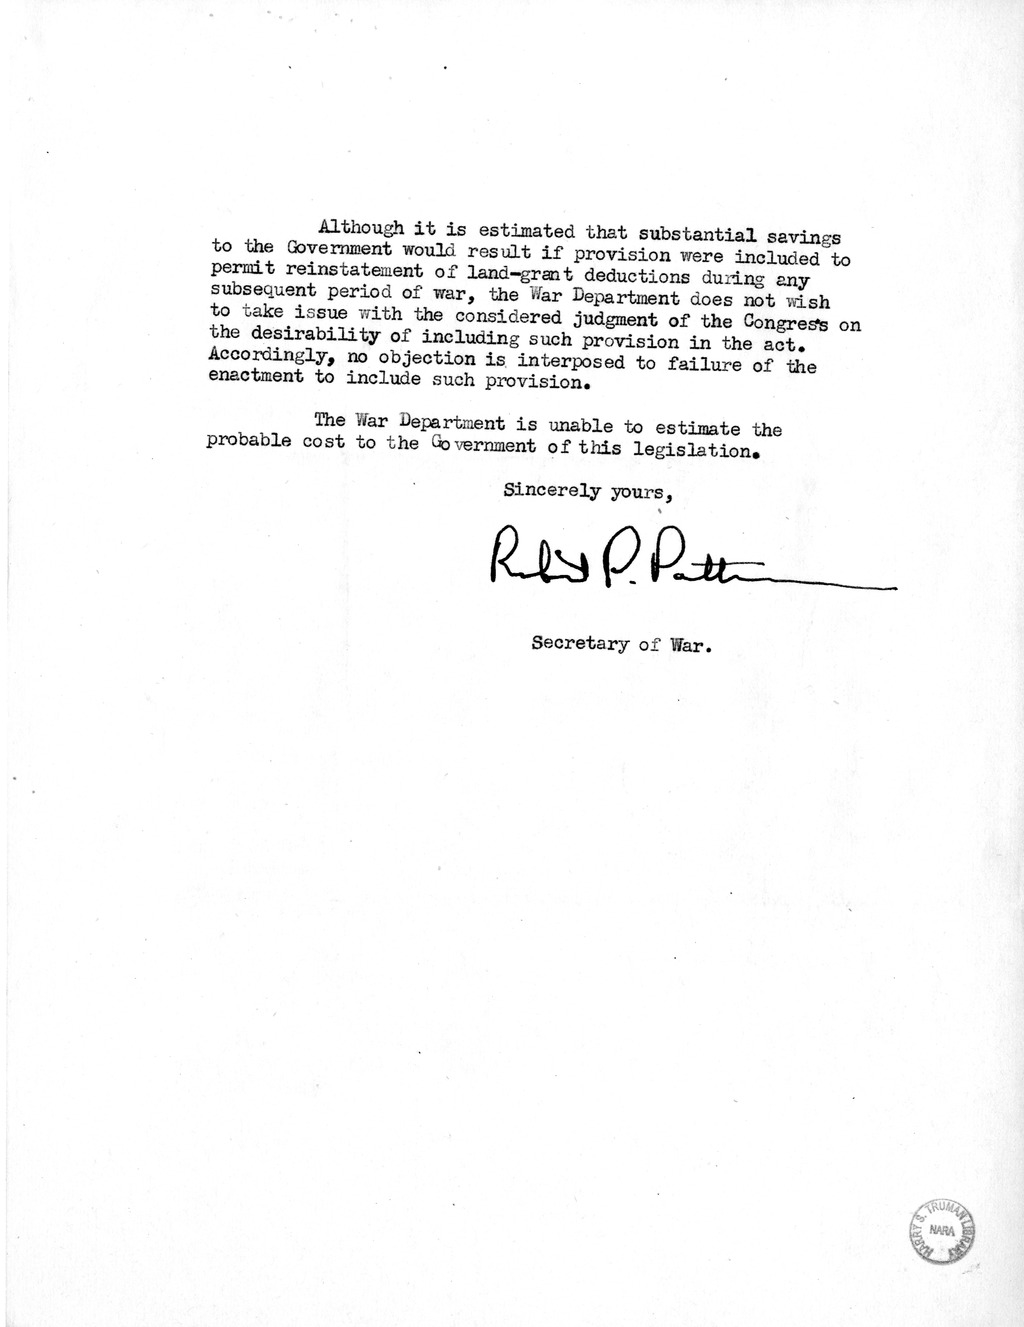 Memorandum from Harold D. Smith to M. C. Latta, H.R. 694, To Amend Section 321, Title III, Part II, Transportation Act of 1940, with Respect to the Movement of Government Traffic, with Attachments